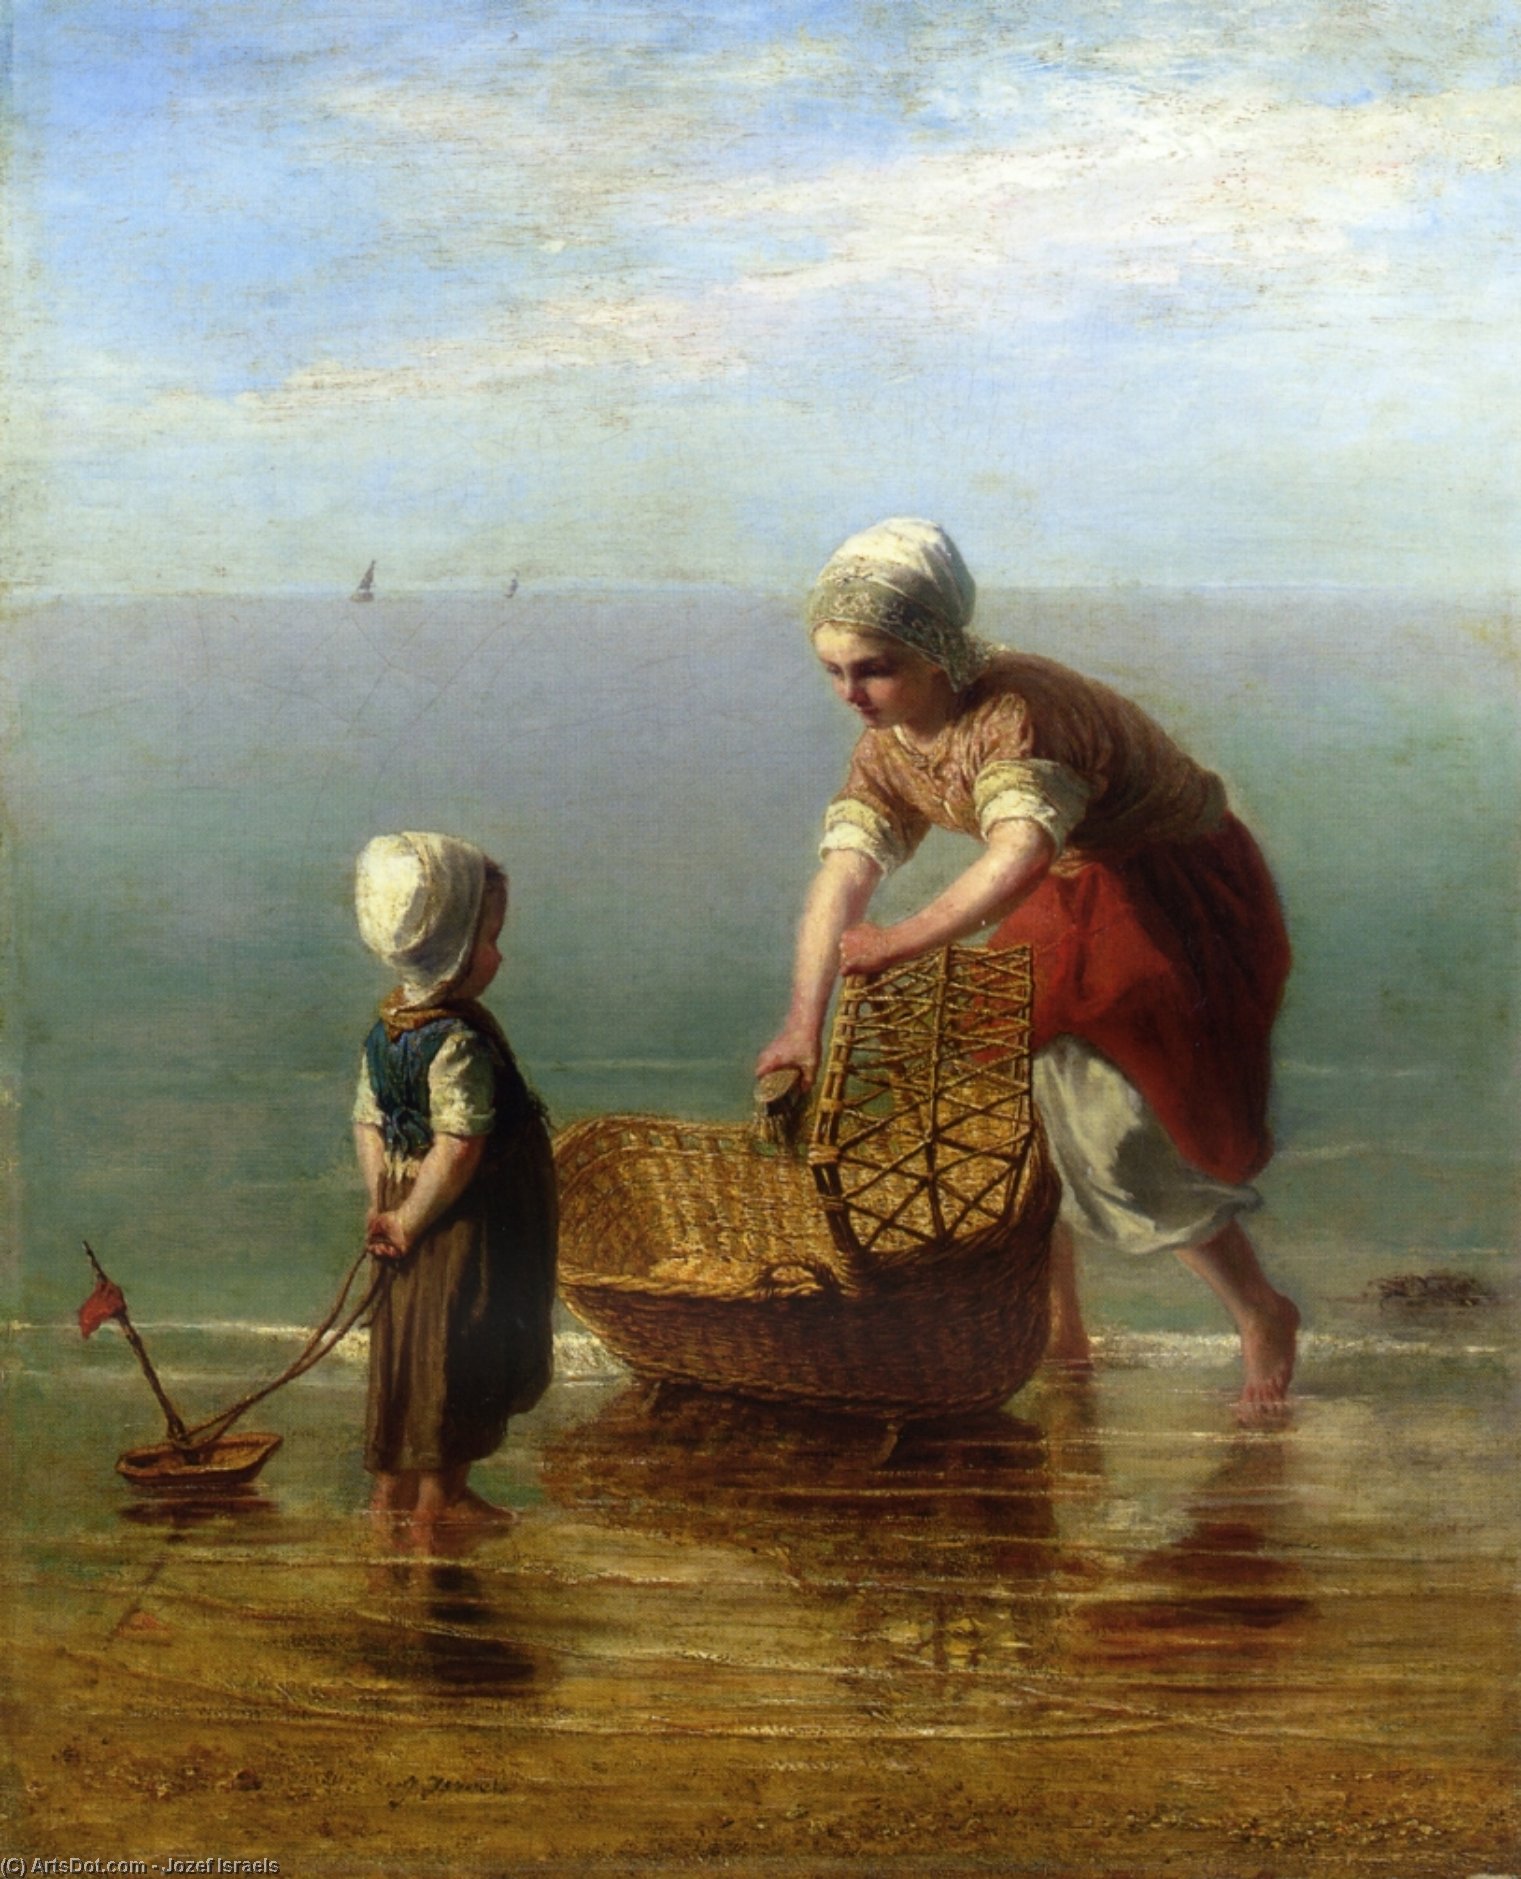 Order Paintings Reproductions Mother and Child by the Sea by Jozef Israels (1824-1911, Netherlands) | ArtsDot.com